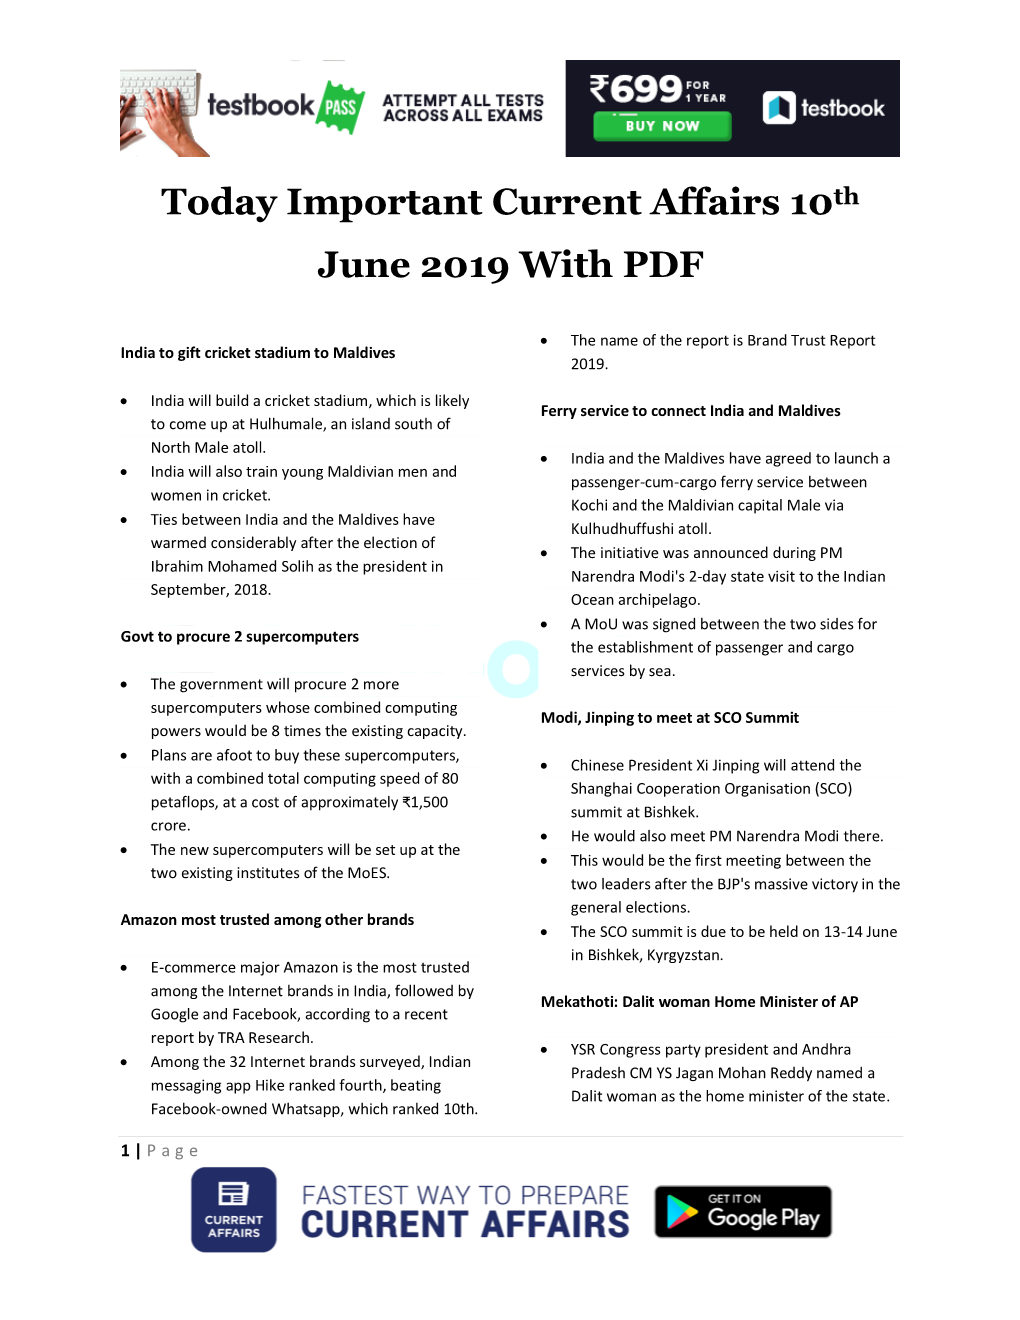 Today Important Current Affairs 10Th June 2019 with PDF